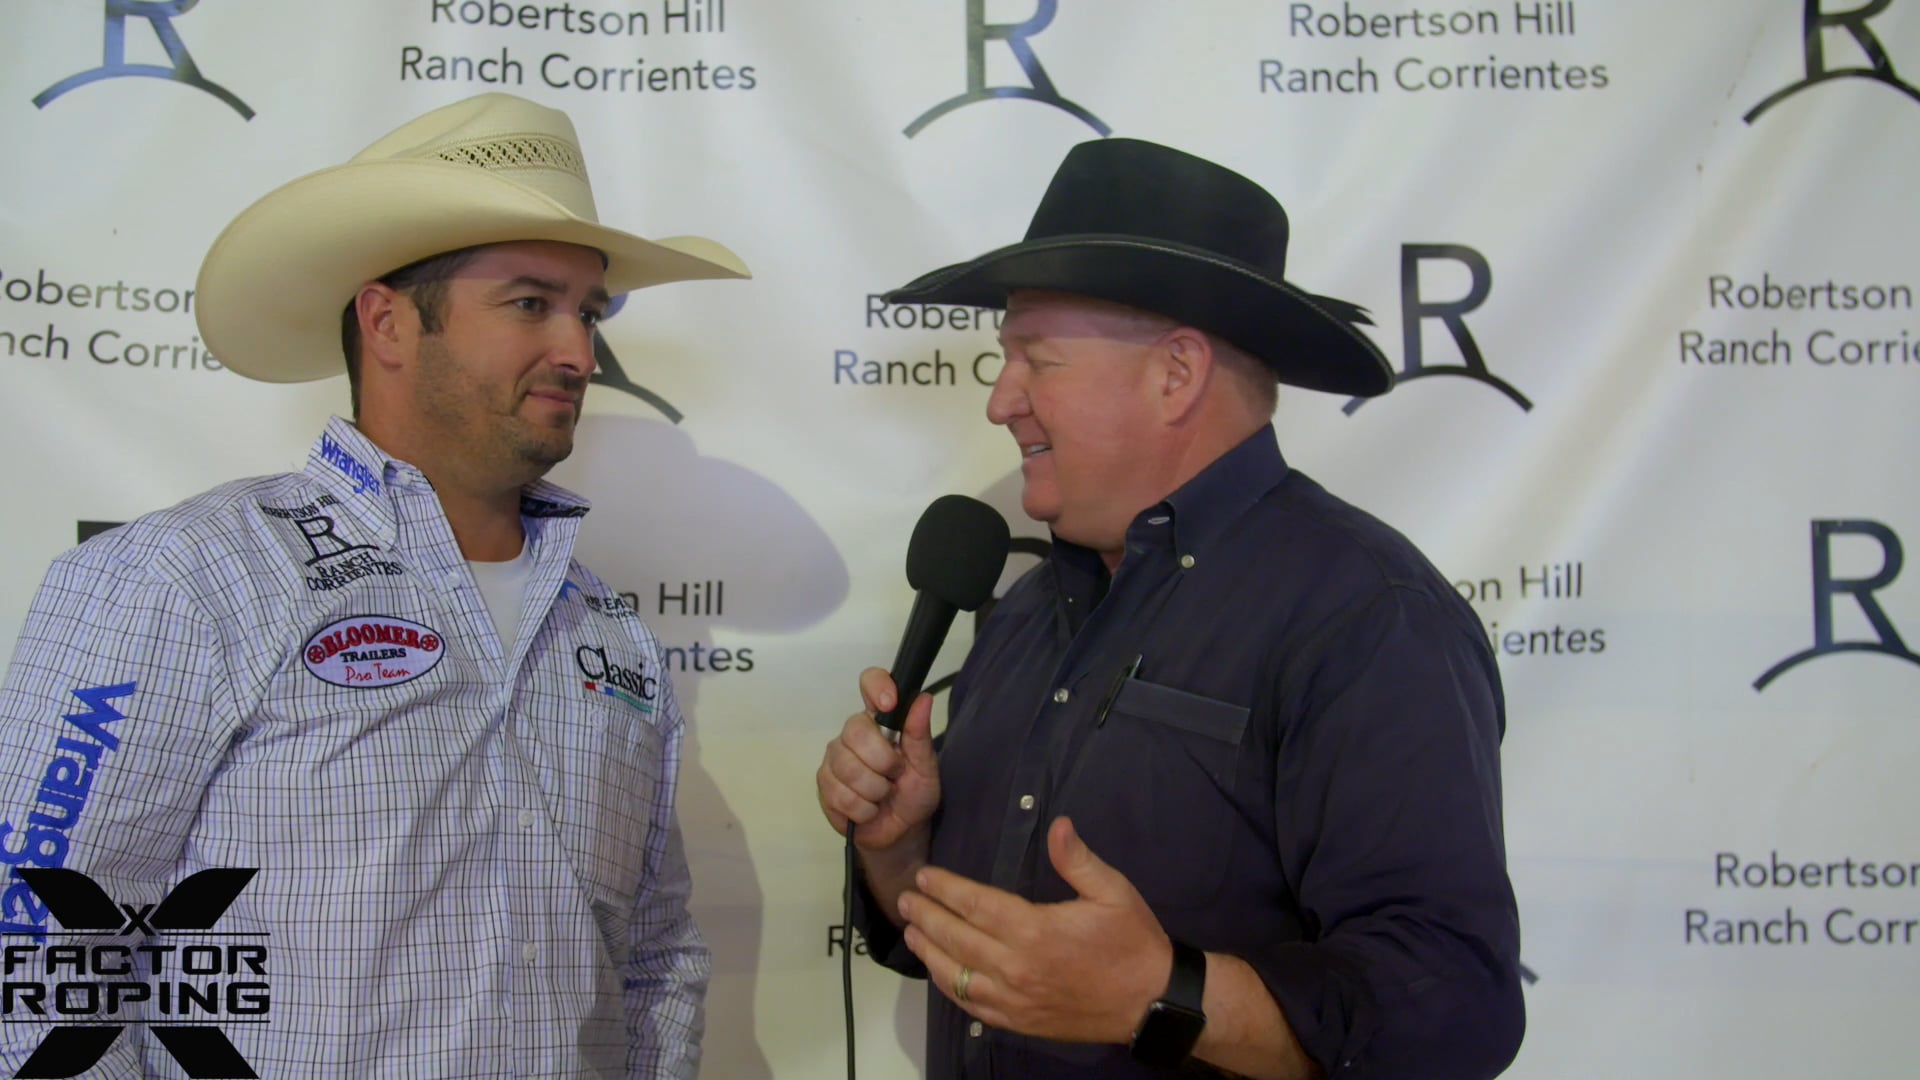 FREE Post Roping Interview with Austin Robertson